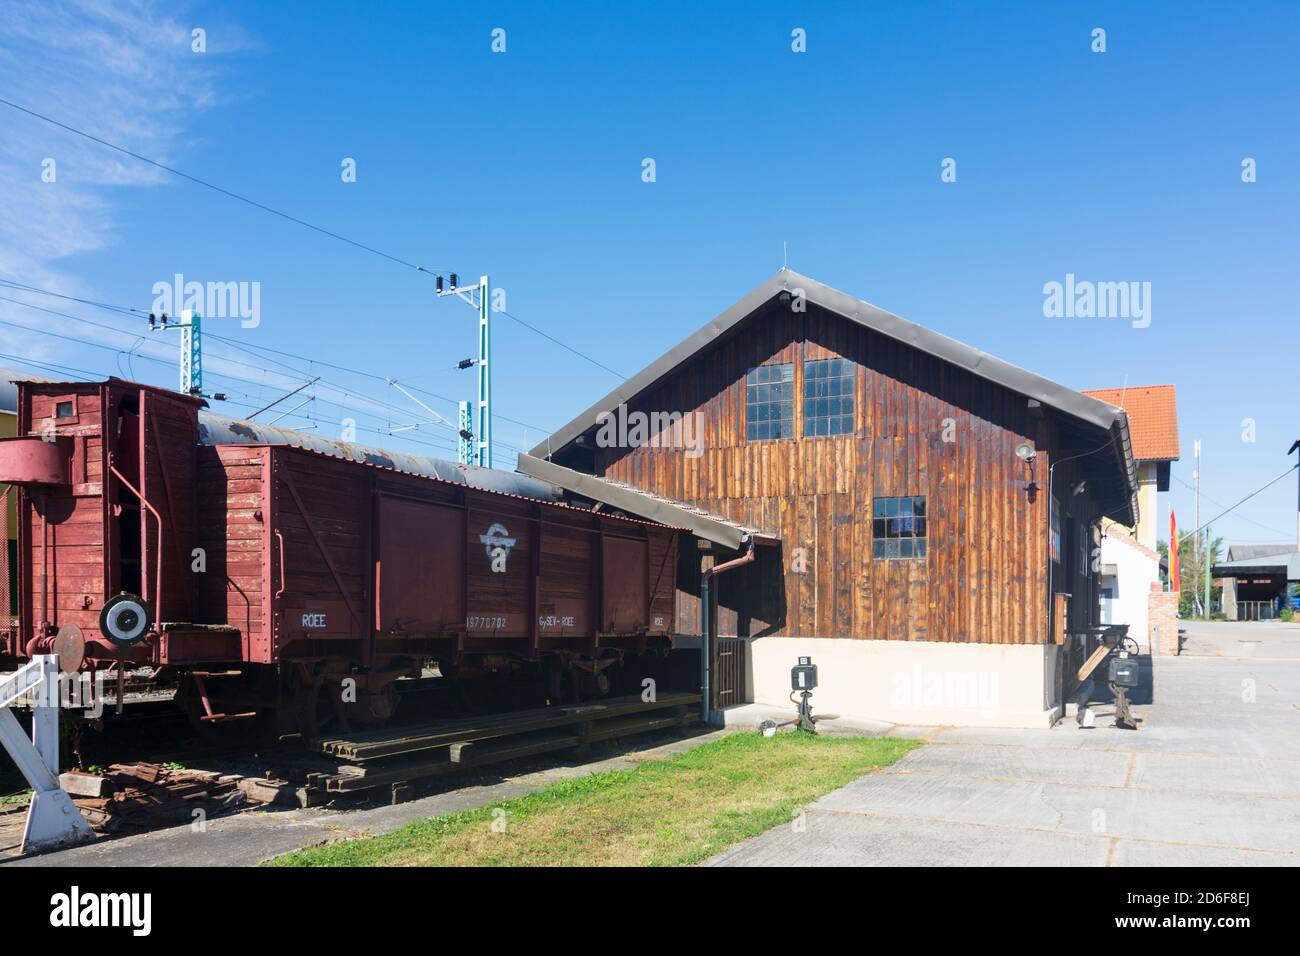 Mönchhof, old train station building with museum at Neusiedler See (Lake Neusiedl), Burgenland, Austria Stock Photo